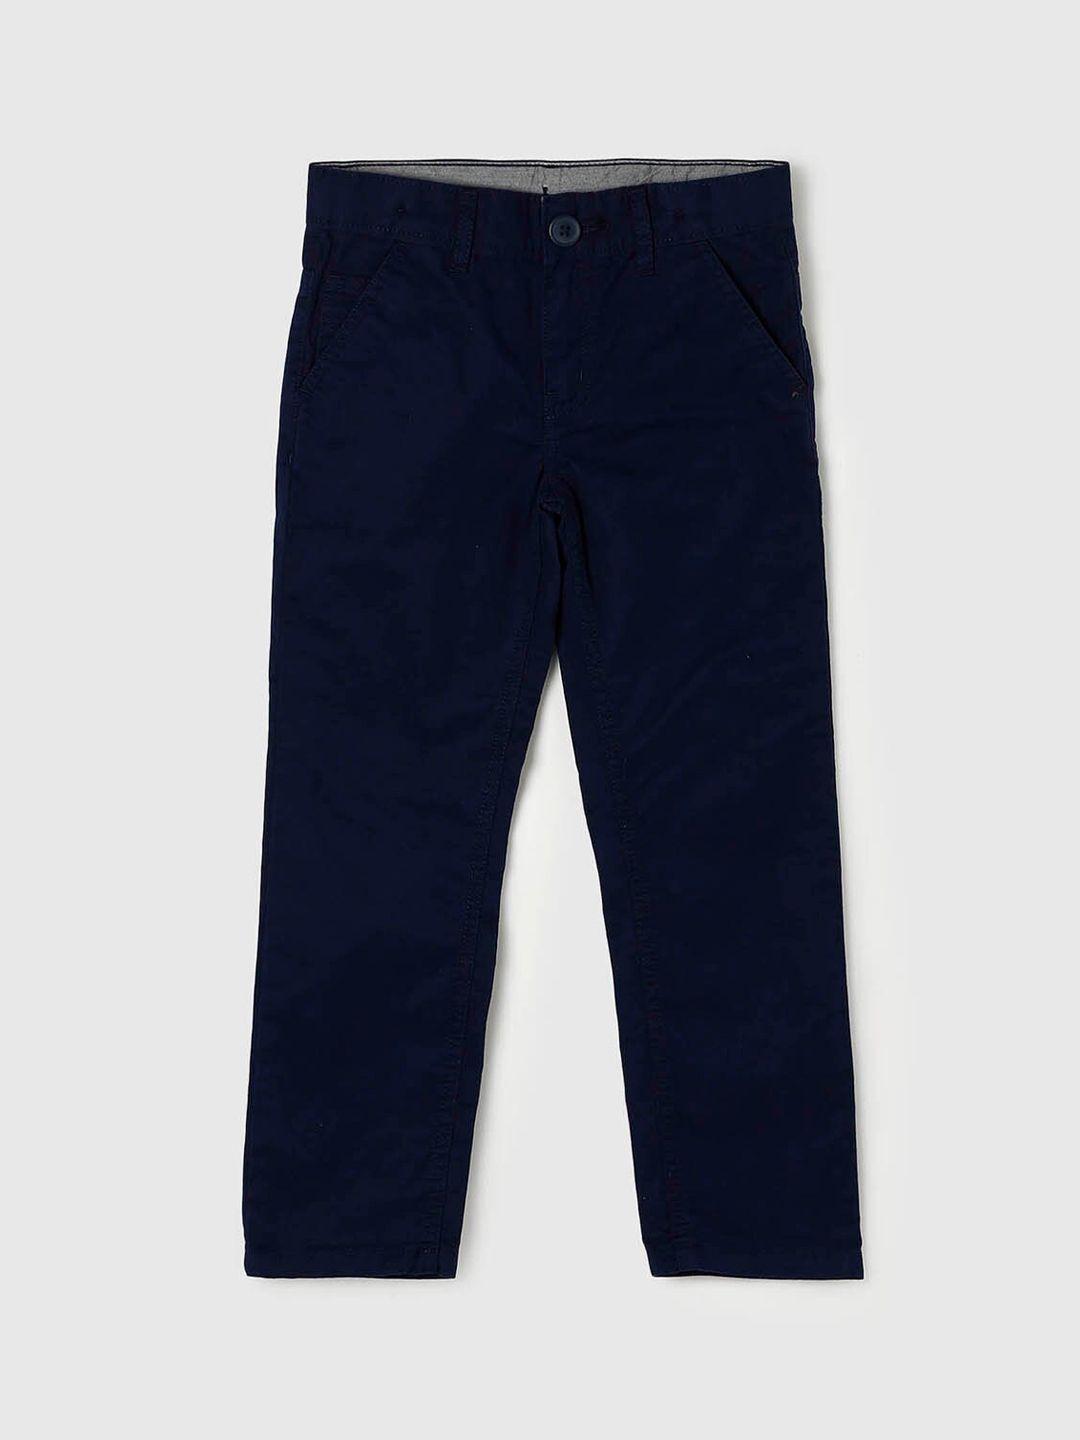 max-boys-blue-chinos-cotton-trousers